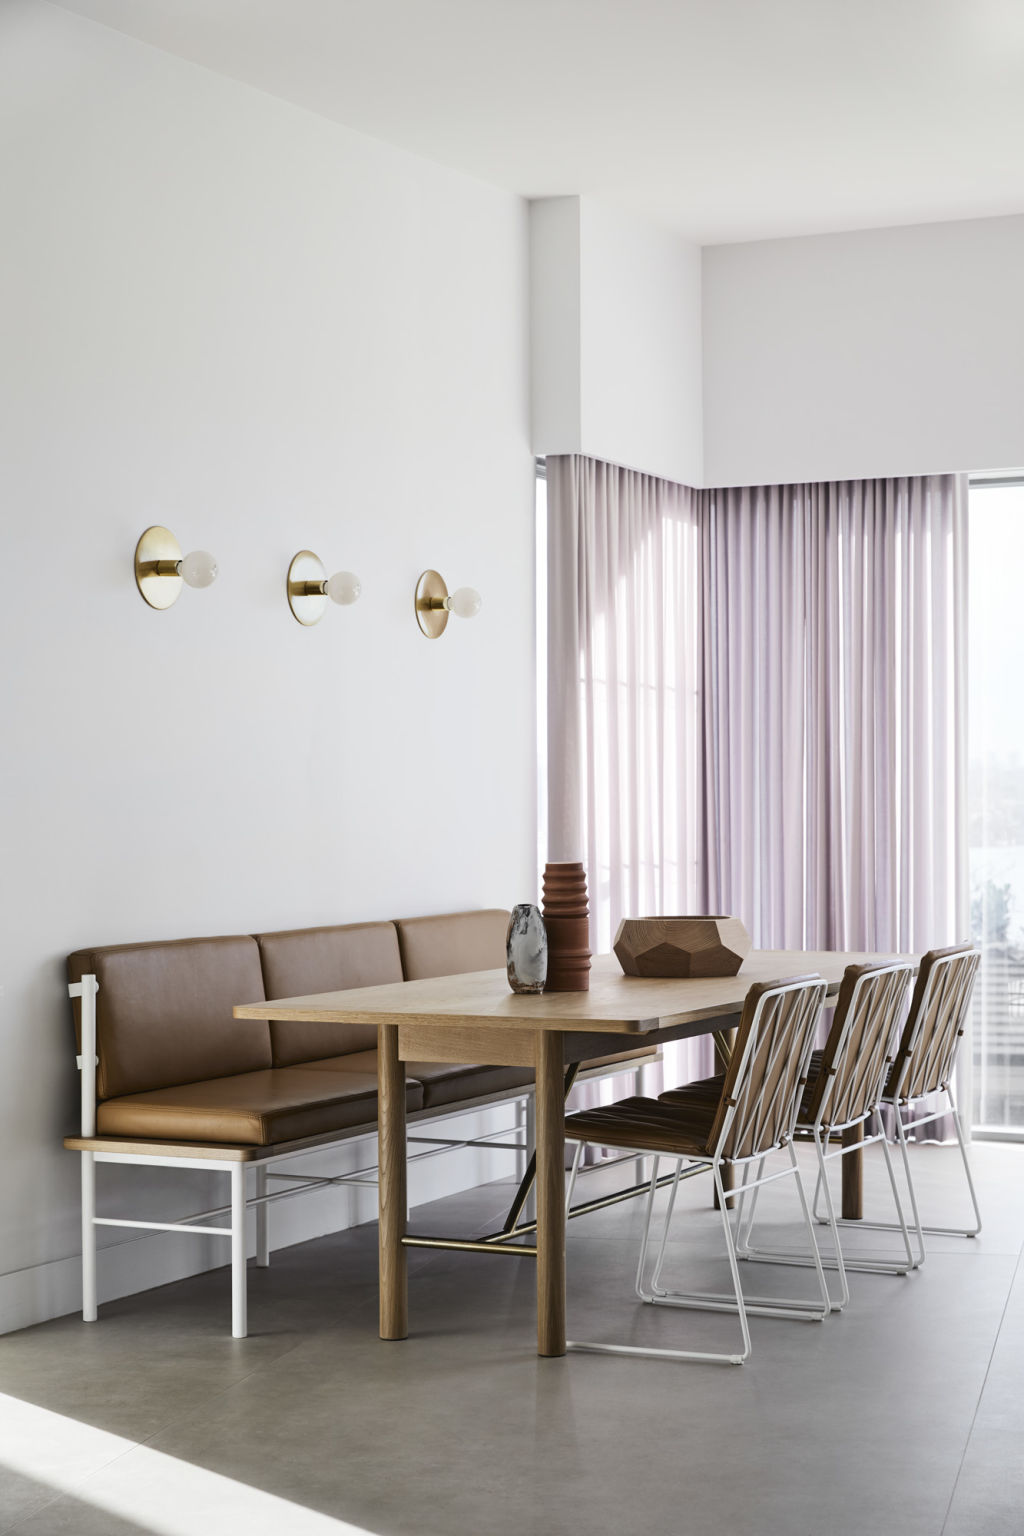 Kritzler is a fan of custom banquette seat on one side of the table with chairs on the other. Photo: Sharyn Cairns